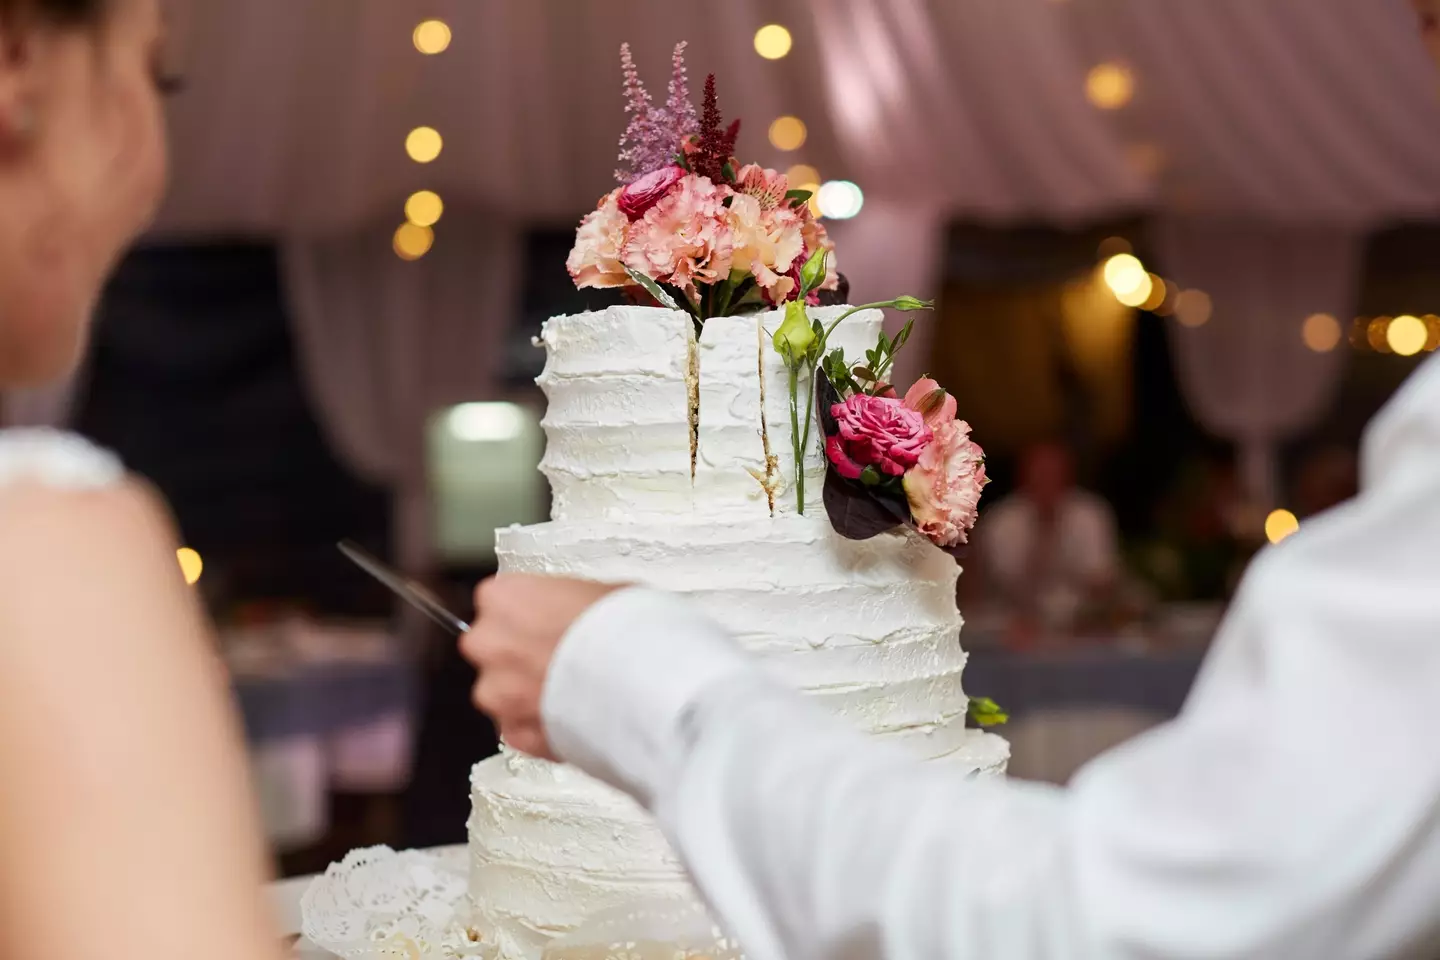 Catering can be one of the most expensive parts of a wedding.